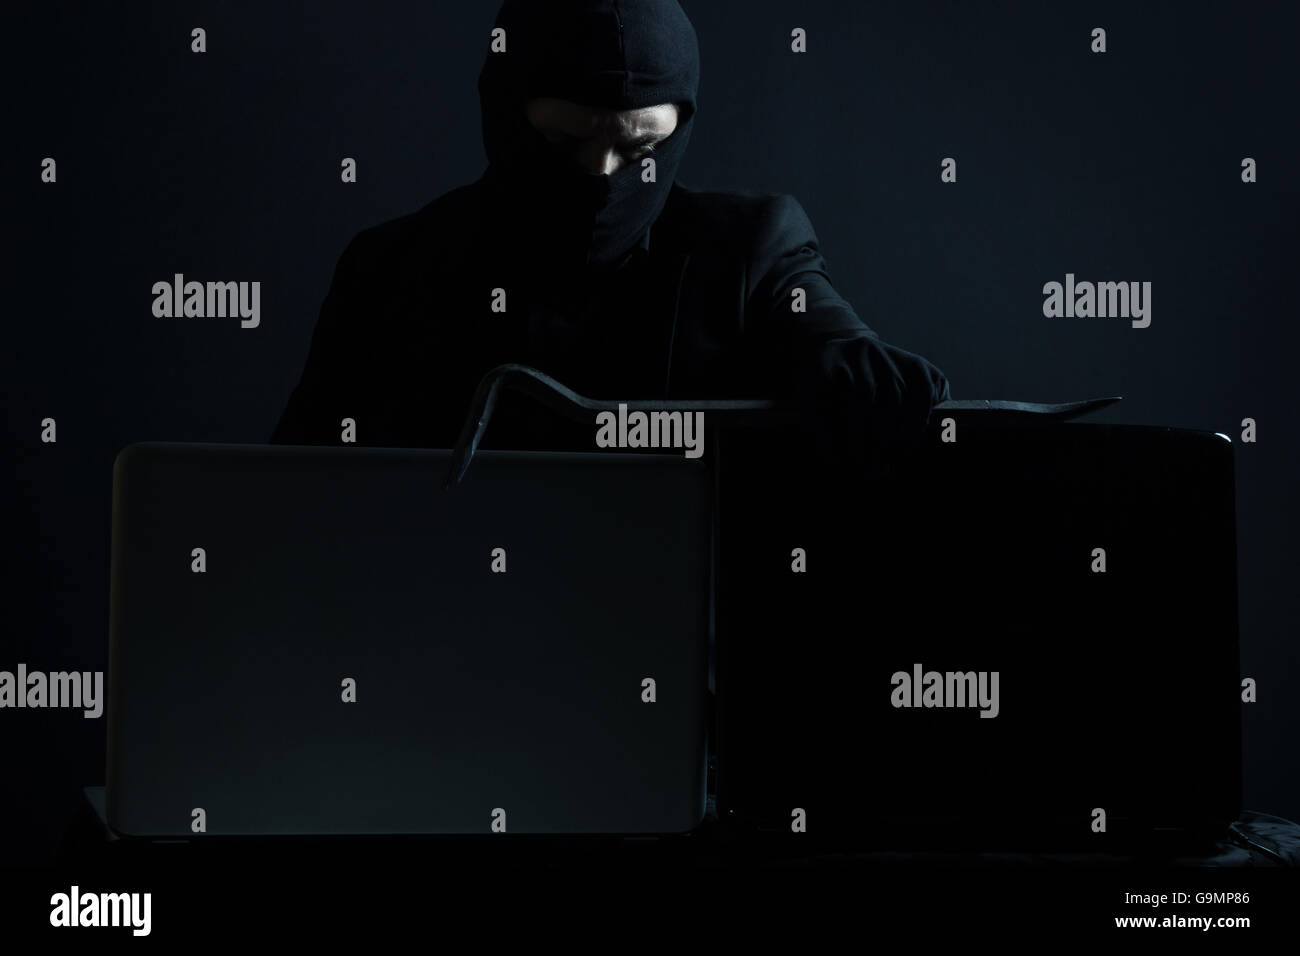 Angry computer hacker in suit stealing data from laptop with crowbar in front of black background Stock Photo